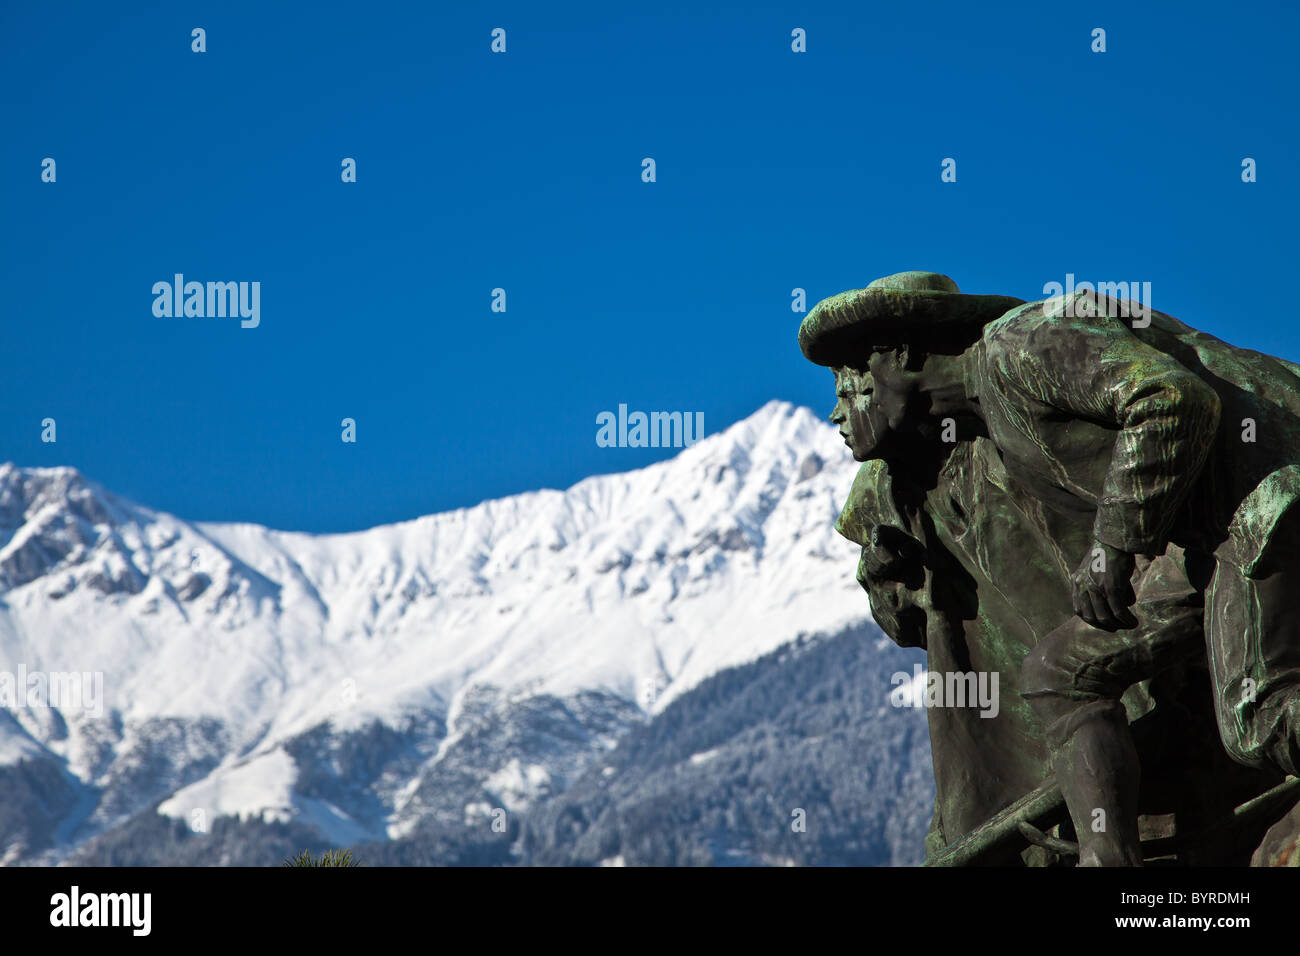 Austria, Tyrol, Innsbruck, view of the mountain from the the Goldner Adler monument Stock Photo